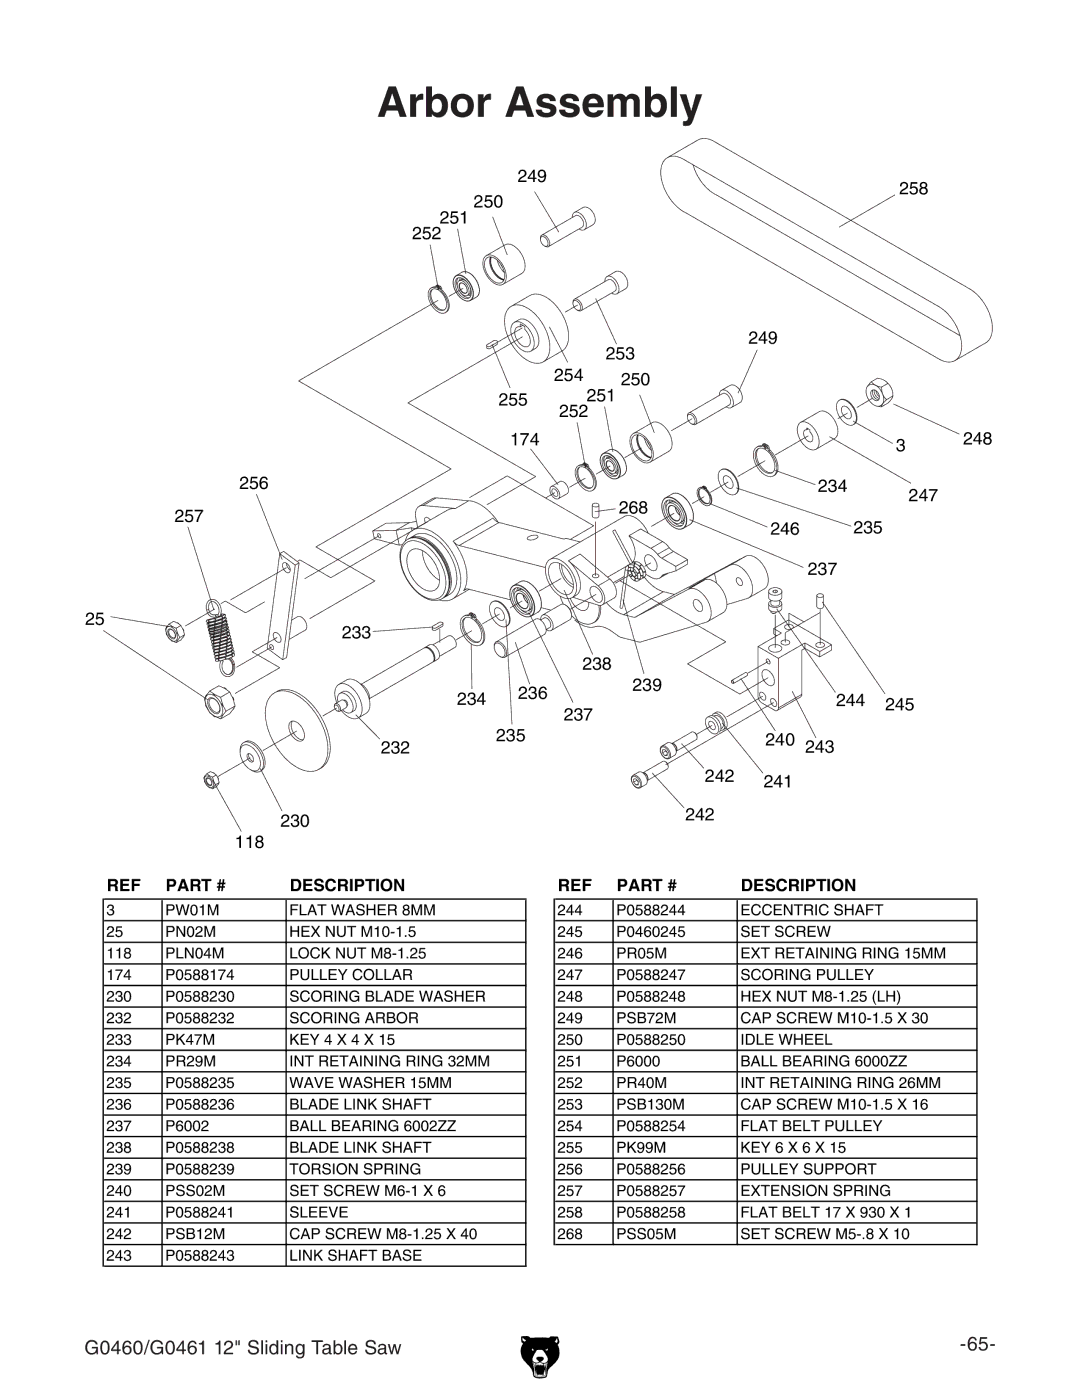 Grizzly G0461, G0460 owner manual Arbor Assembly 